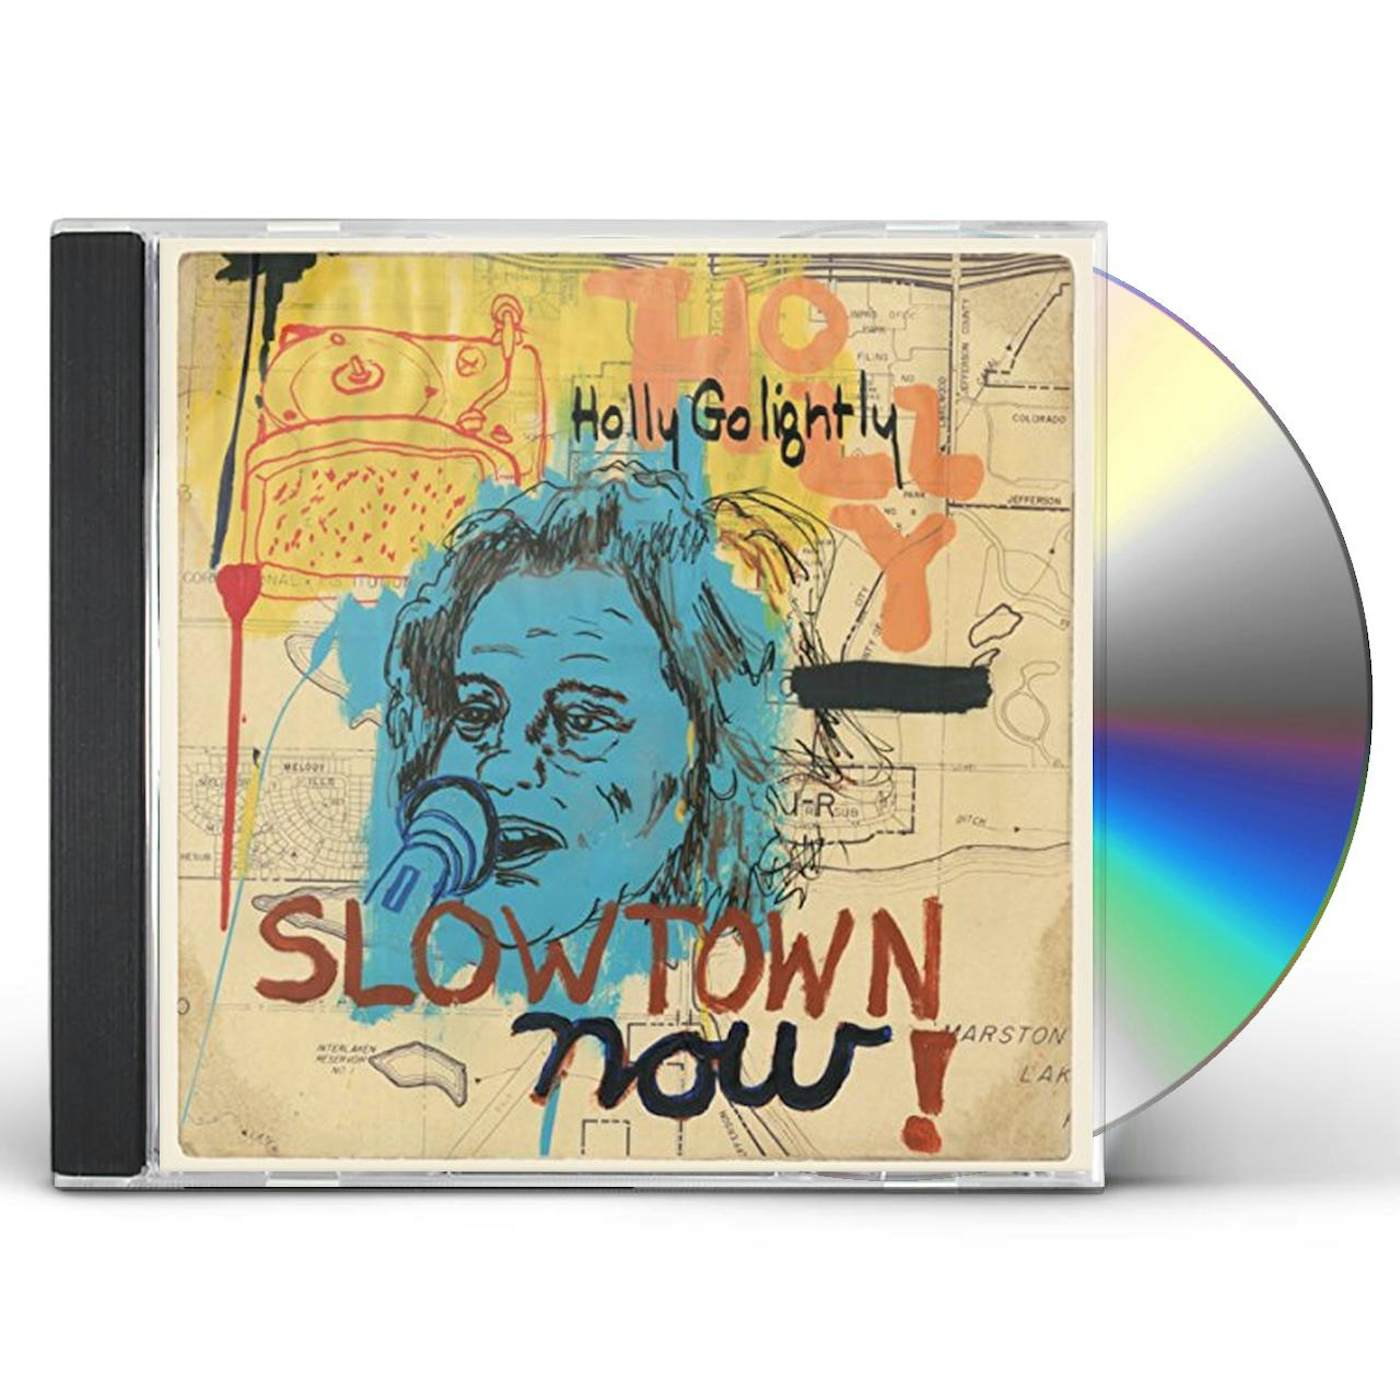 Holly Golightly SLOWTOWN NOW CD